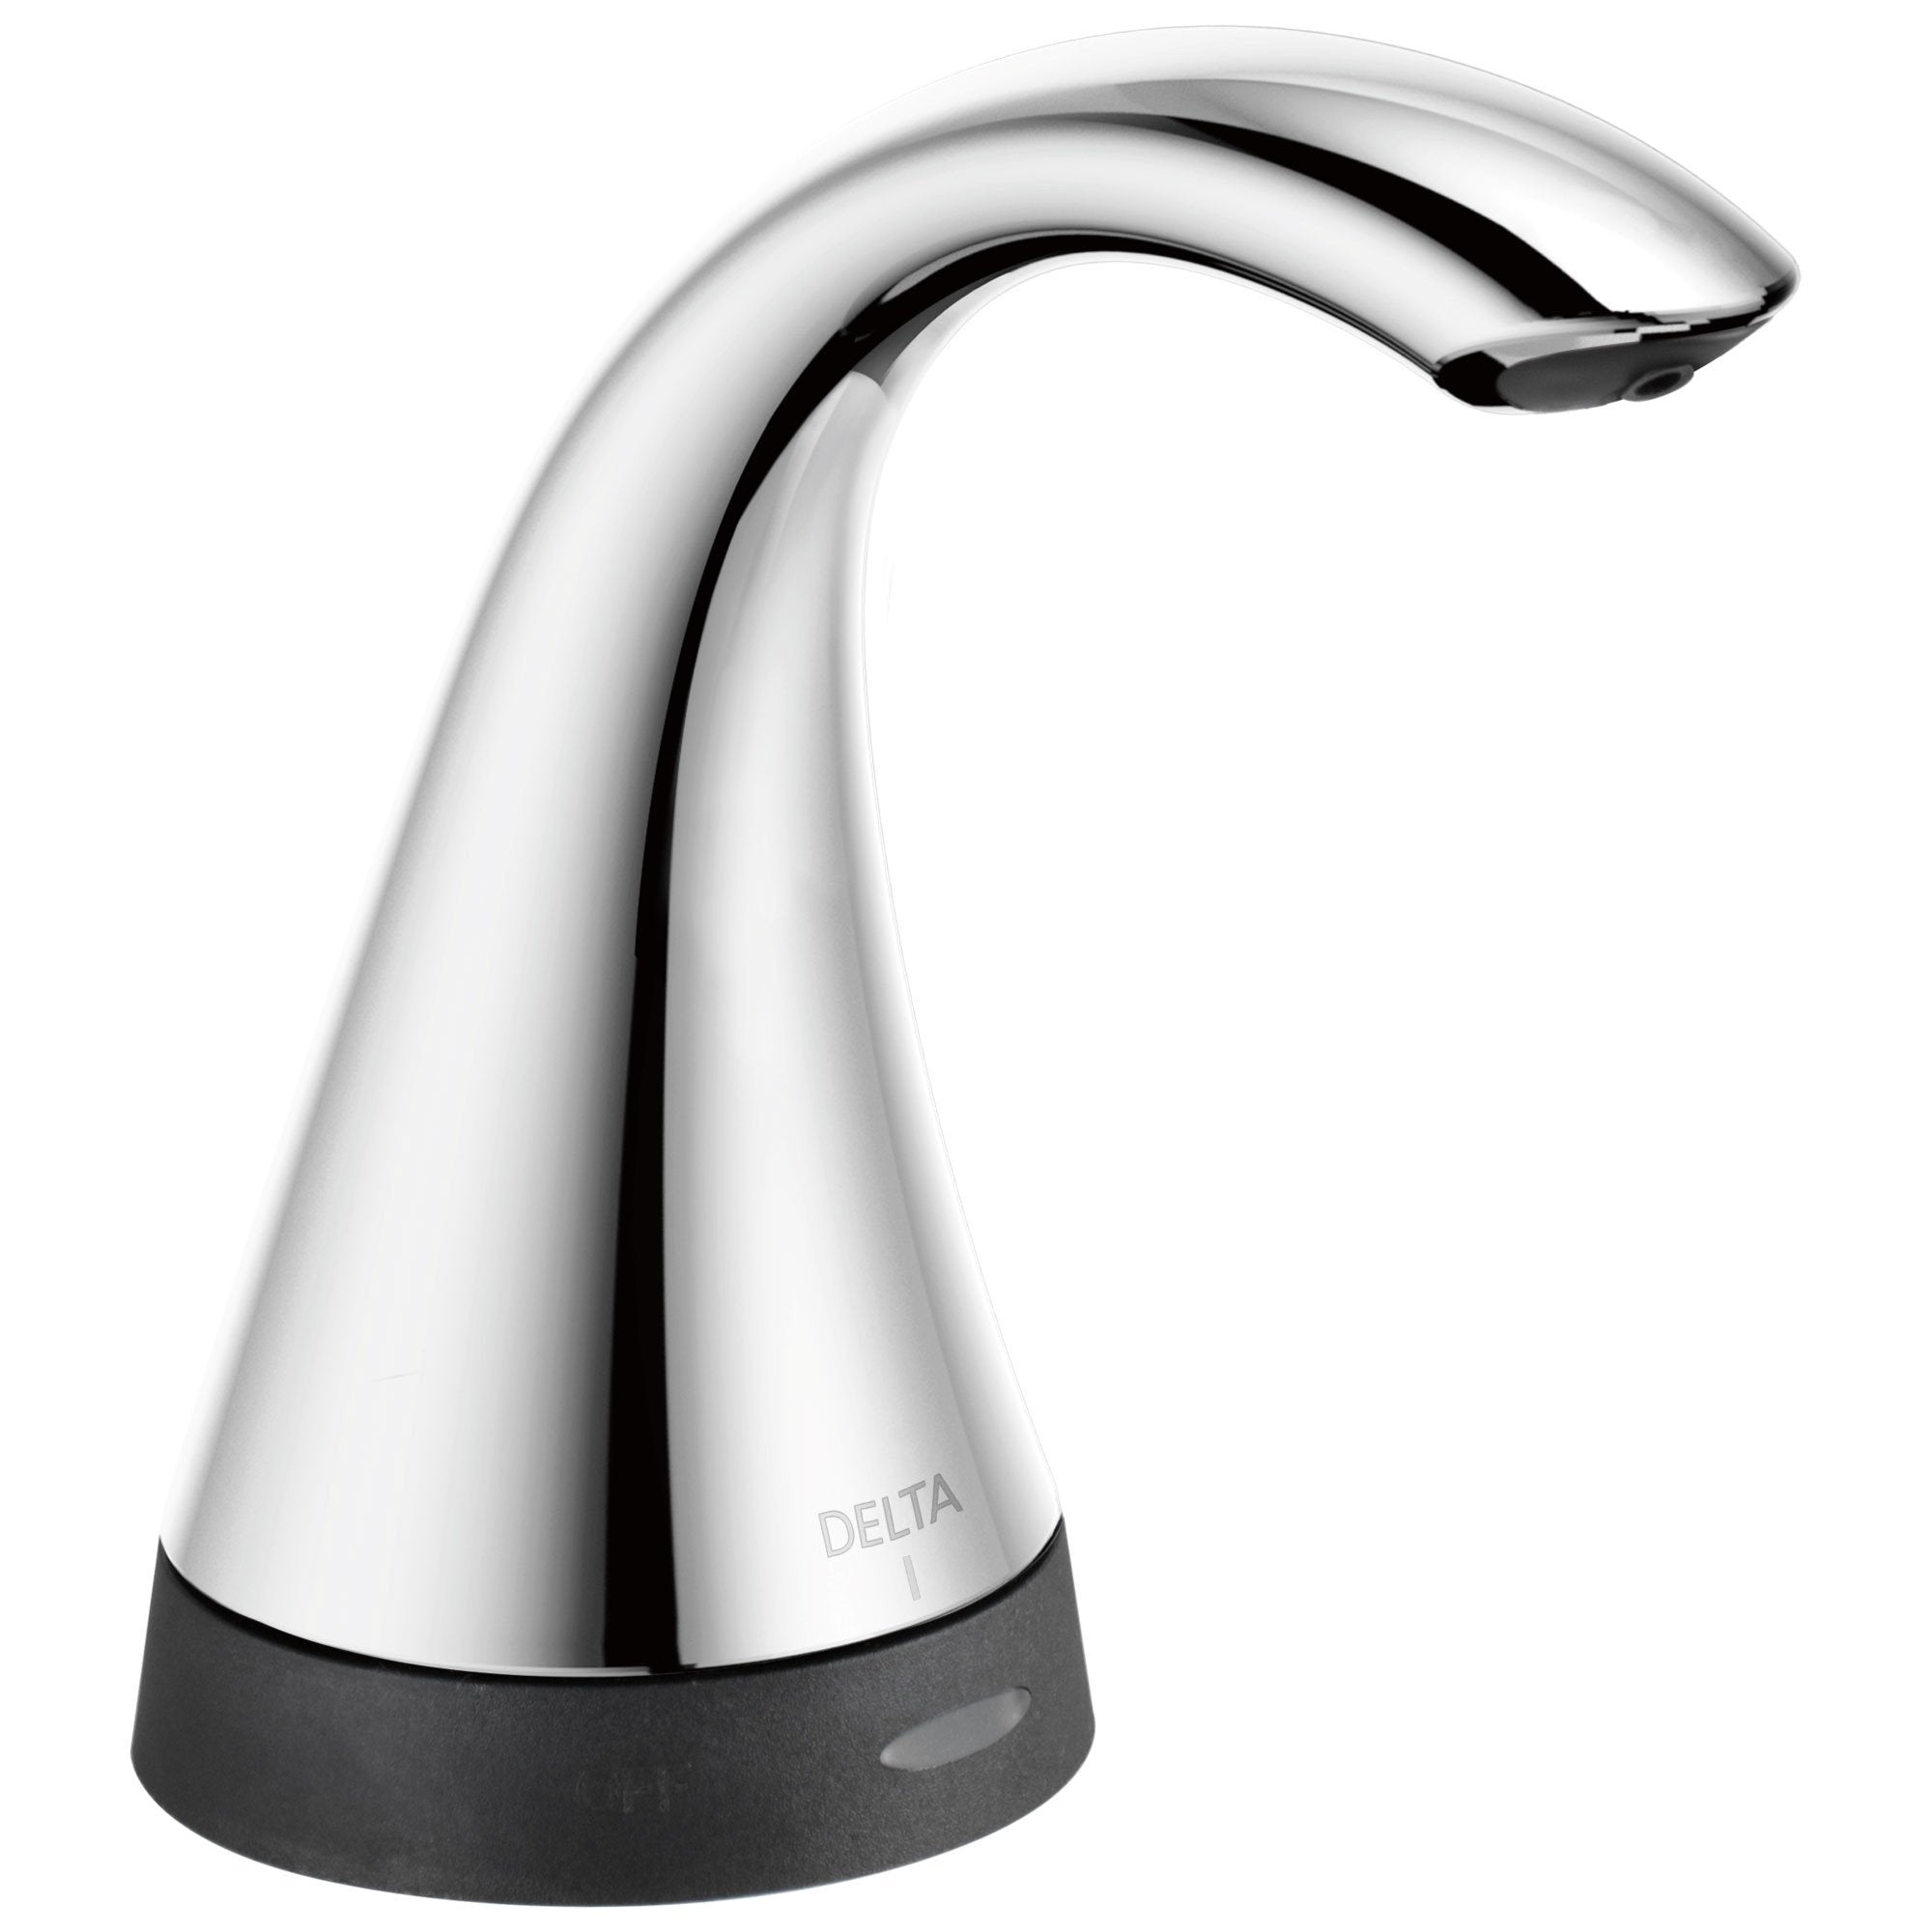 Delta Addison Collection Chrome Finish Transitional Electronic Deck Mounted Soap Dispenser with Touch2Oxt Technology 732805